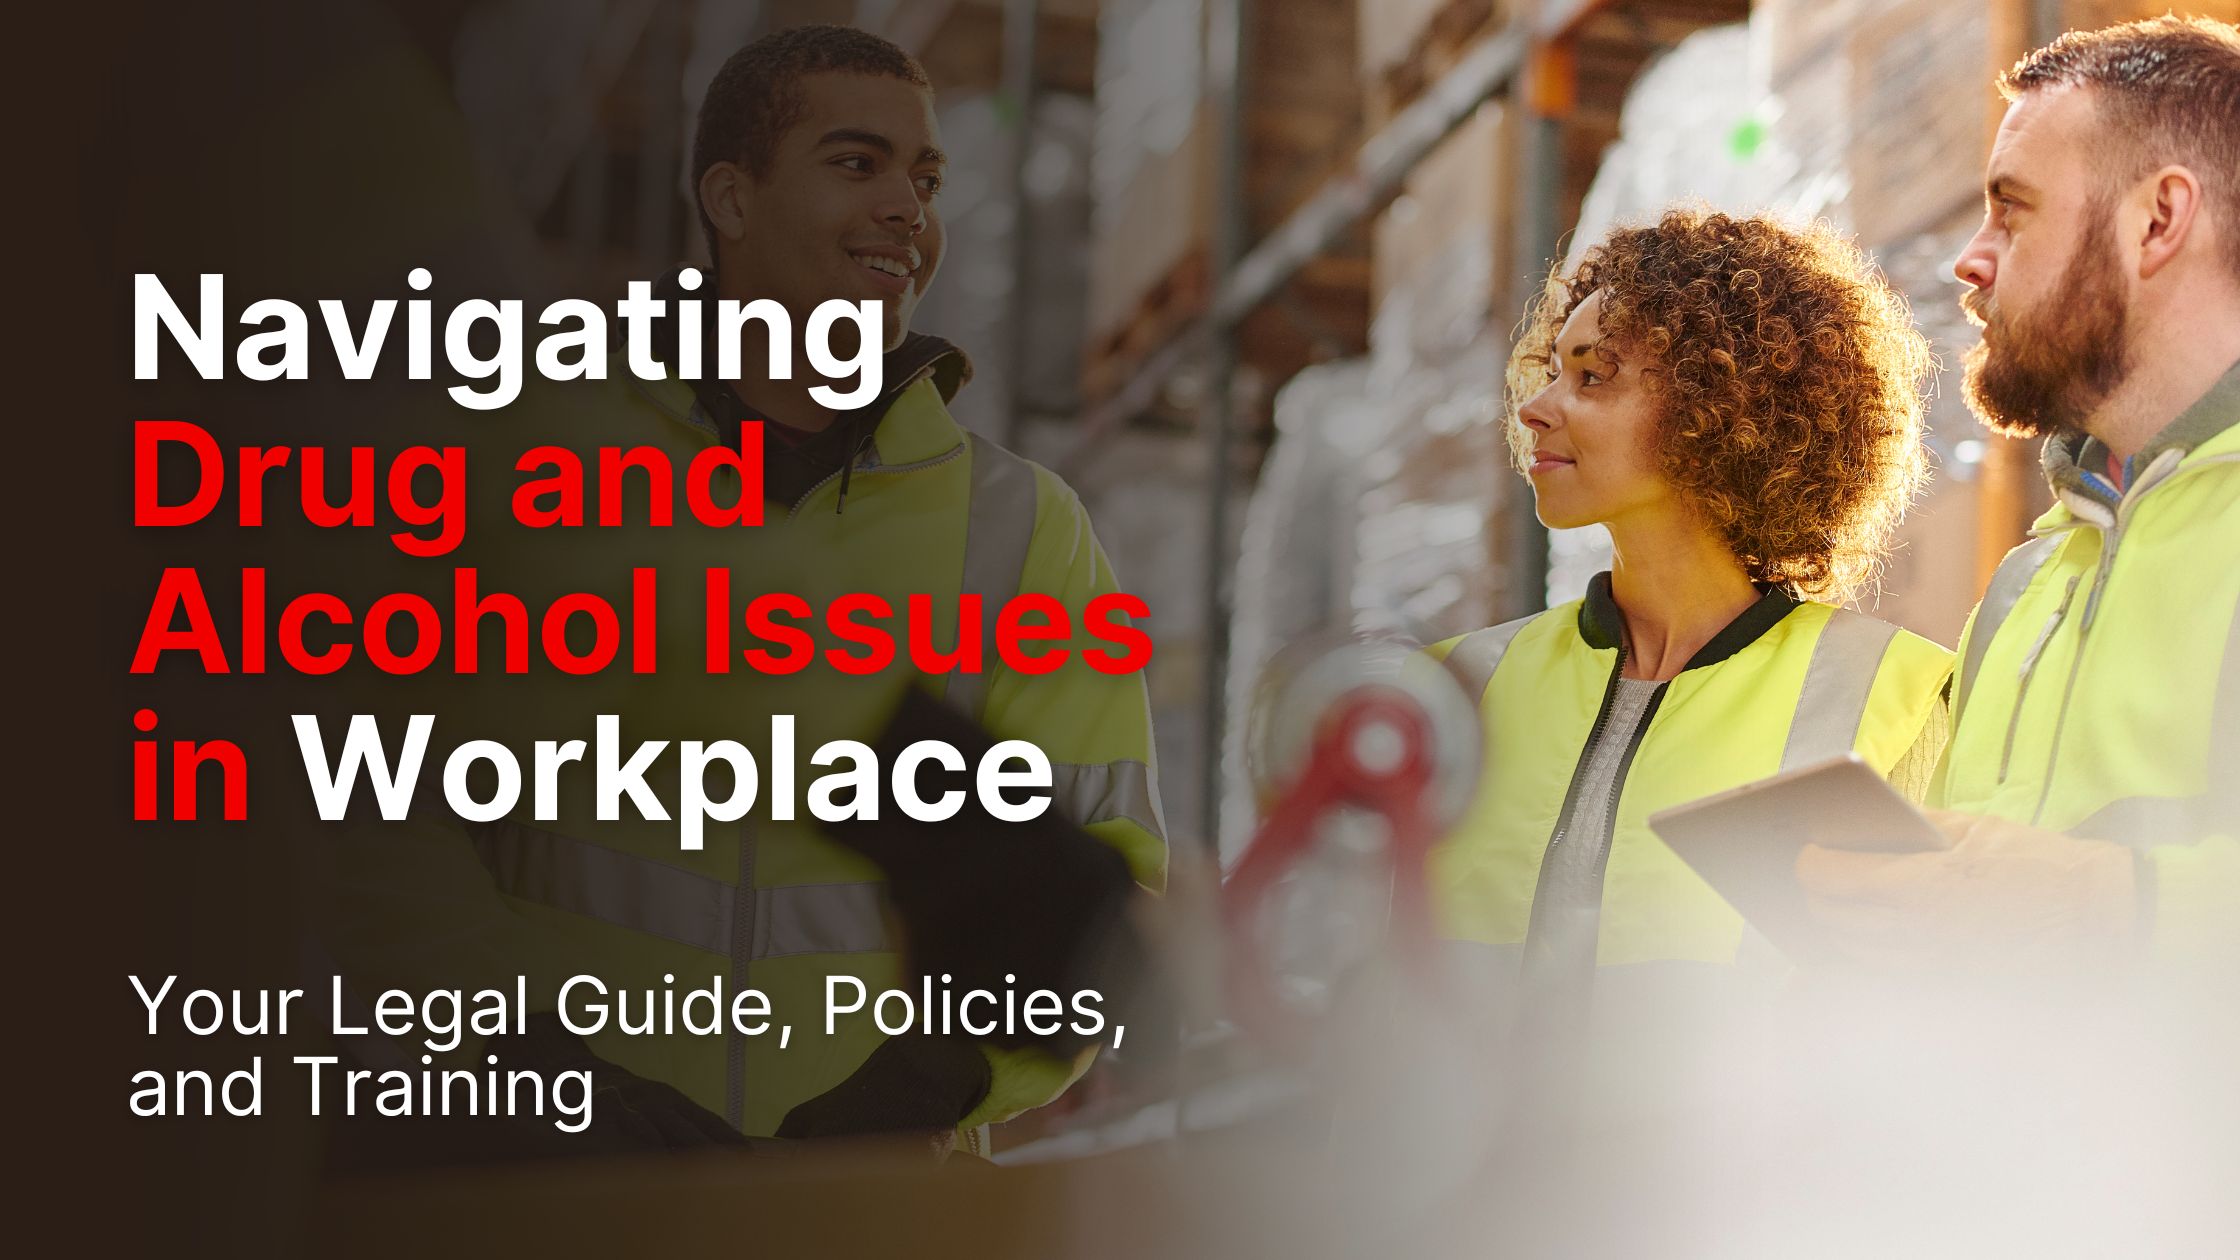 Navigating Drug and Alcohol Issues in the Workplace: Your Legal Guide, Policies, and Training